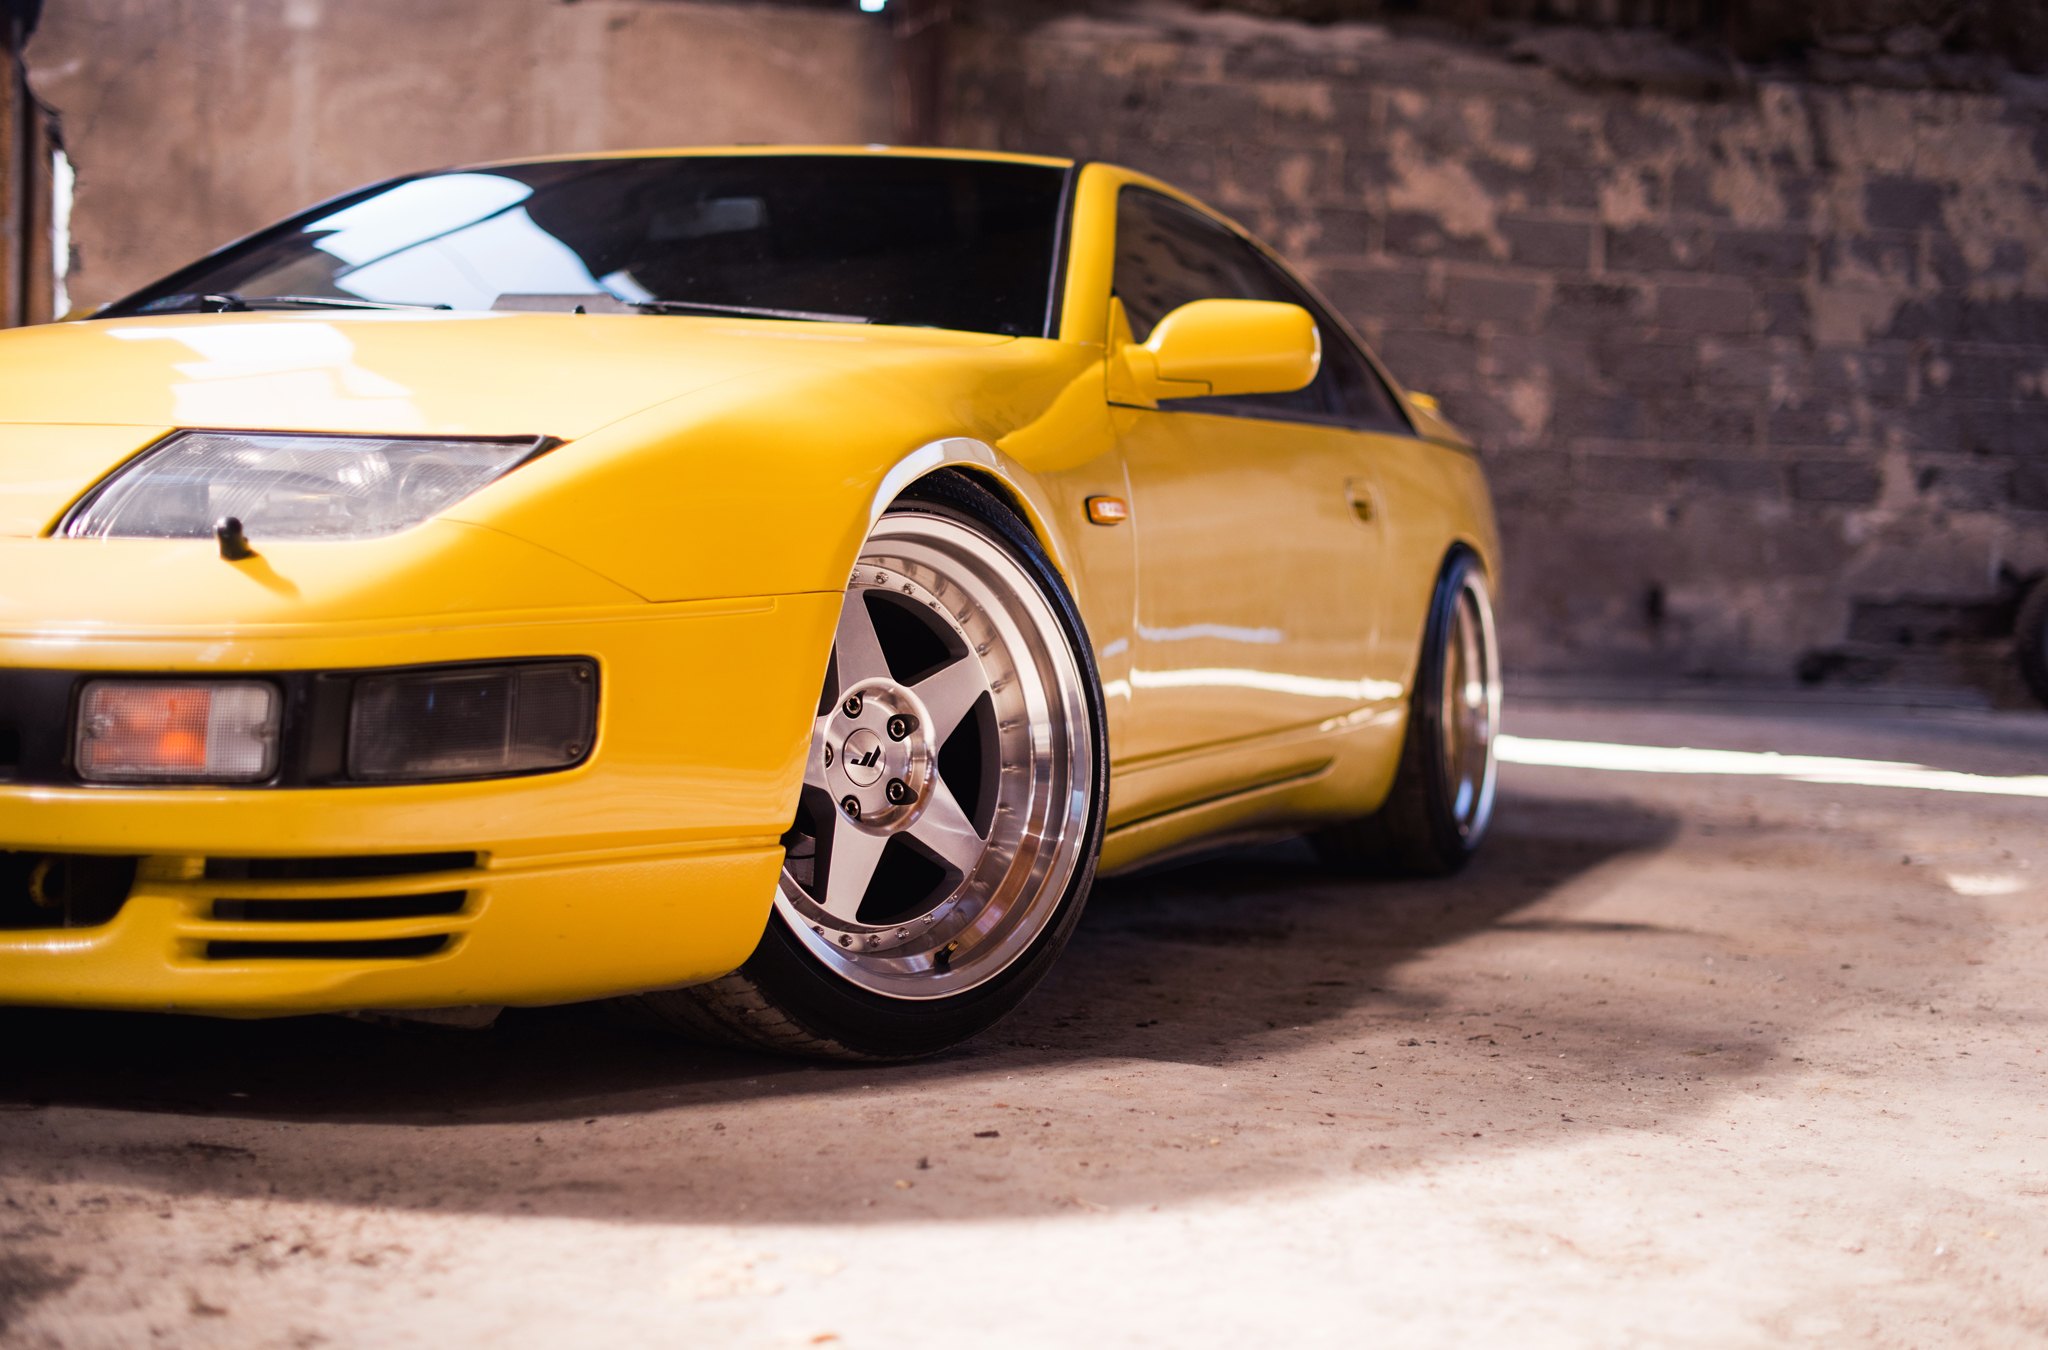 Aftermarket Front Bumper on Yellow Nissan 300ZX - Photo by JR Wheels